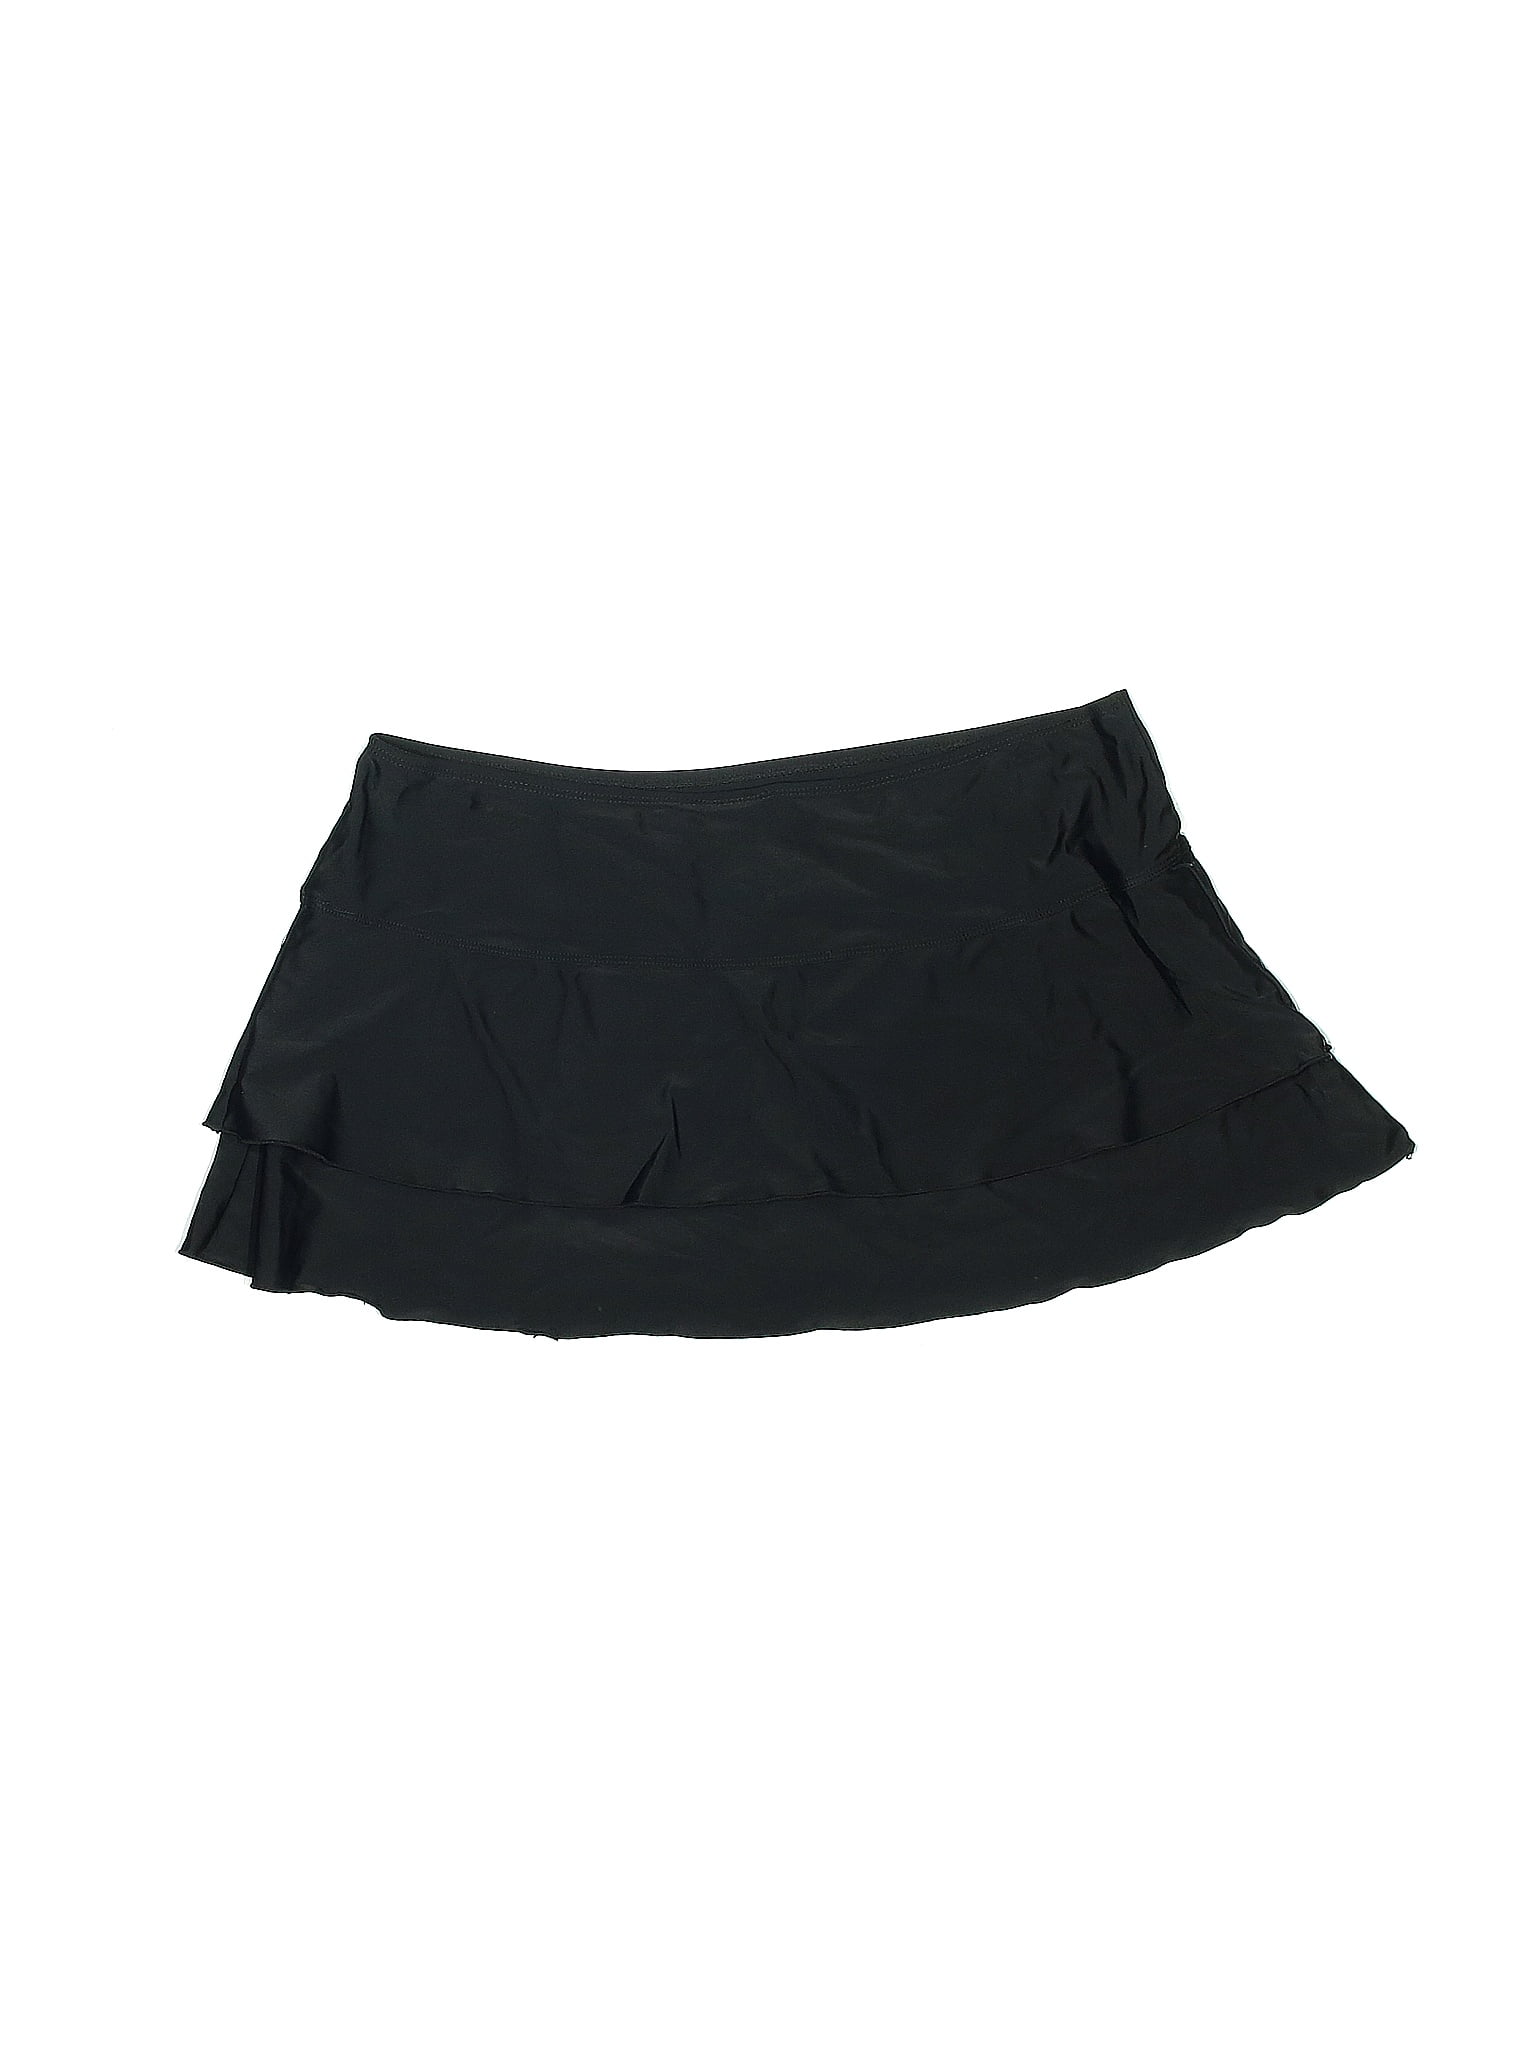 Sporti Solid Cover Up Swim Skirt at